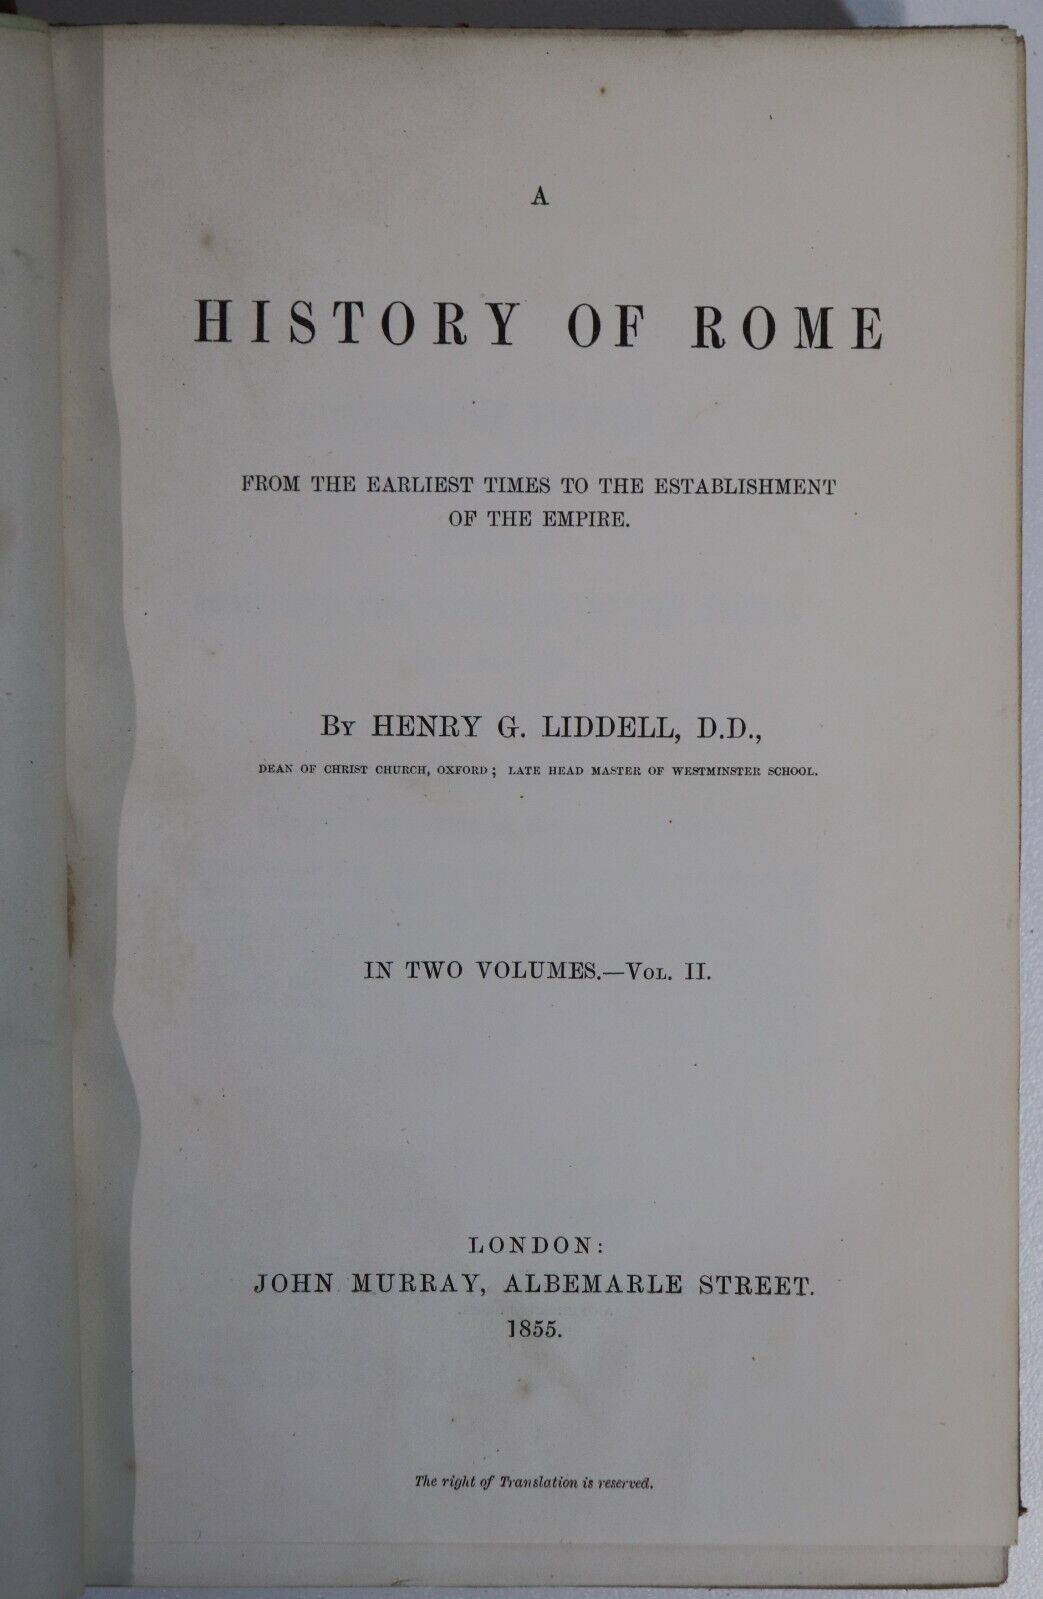 A History Of Rome by H.G. Liddell - 1855 - Antique Roman History Book 2 Vol. Set